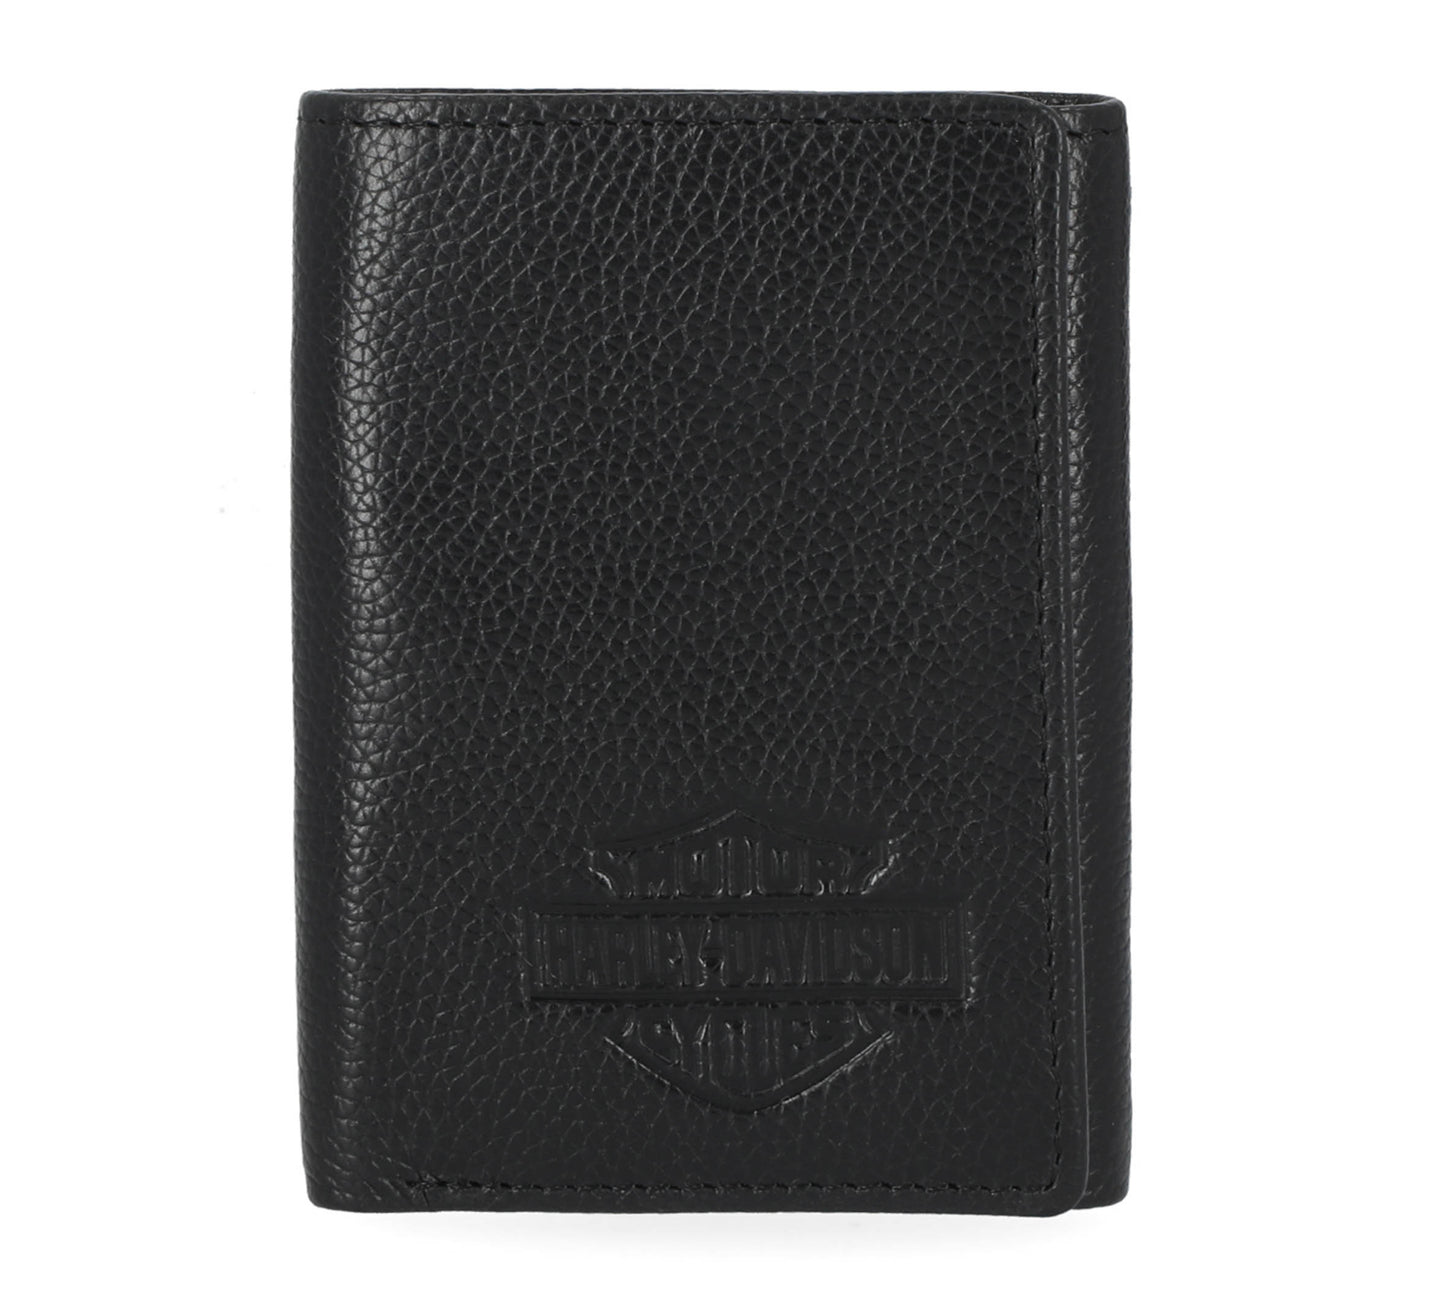 Harley-Davidson Classic Leather B&S Trifold